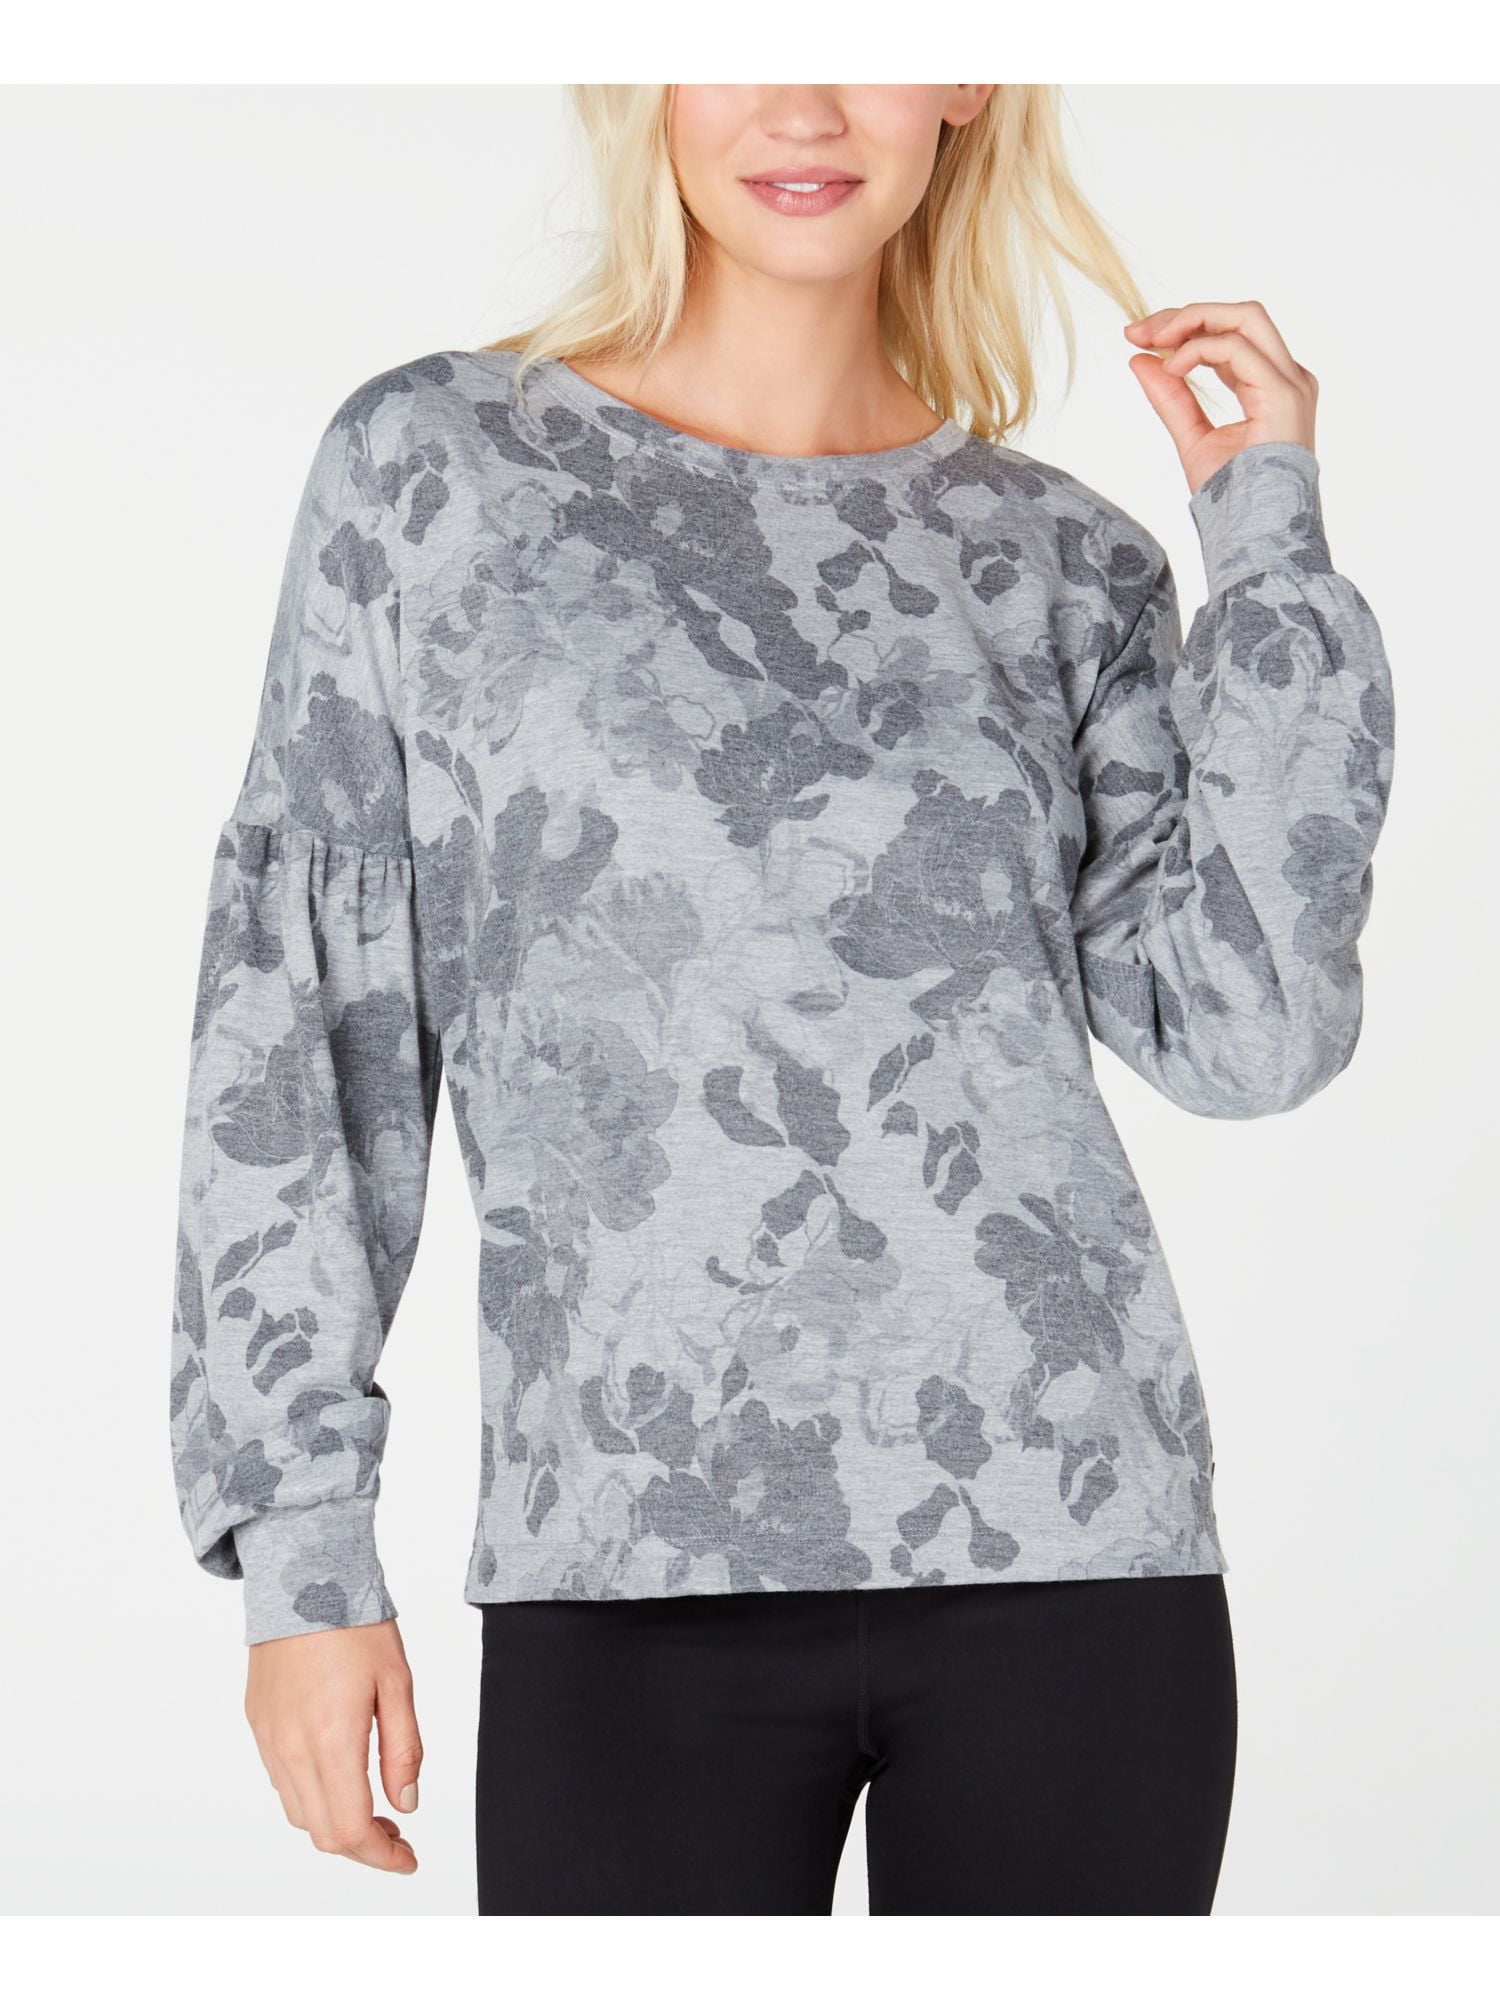 IDEOLOGY Womens Gray Puffed Sleeved Printed Long Sleeve Crew Neck T